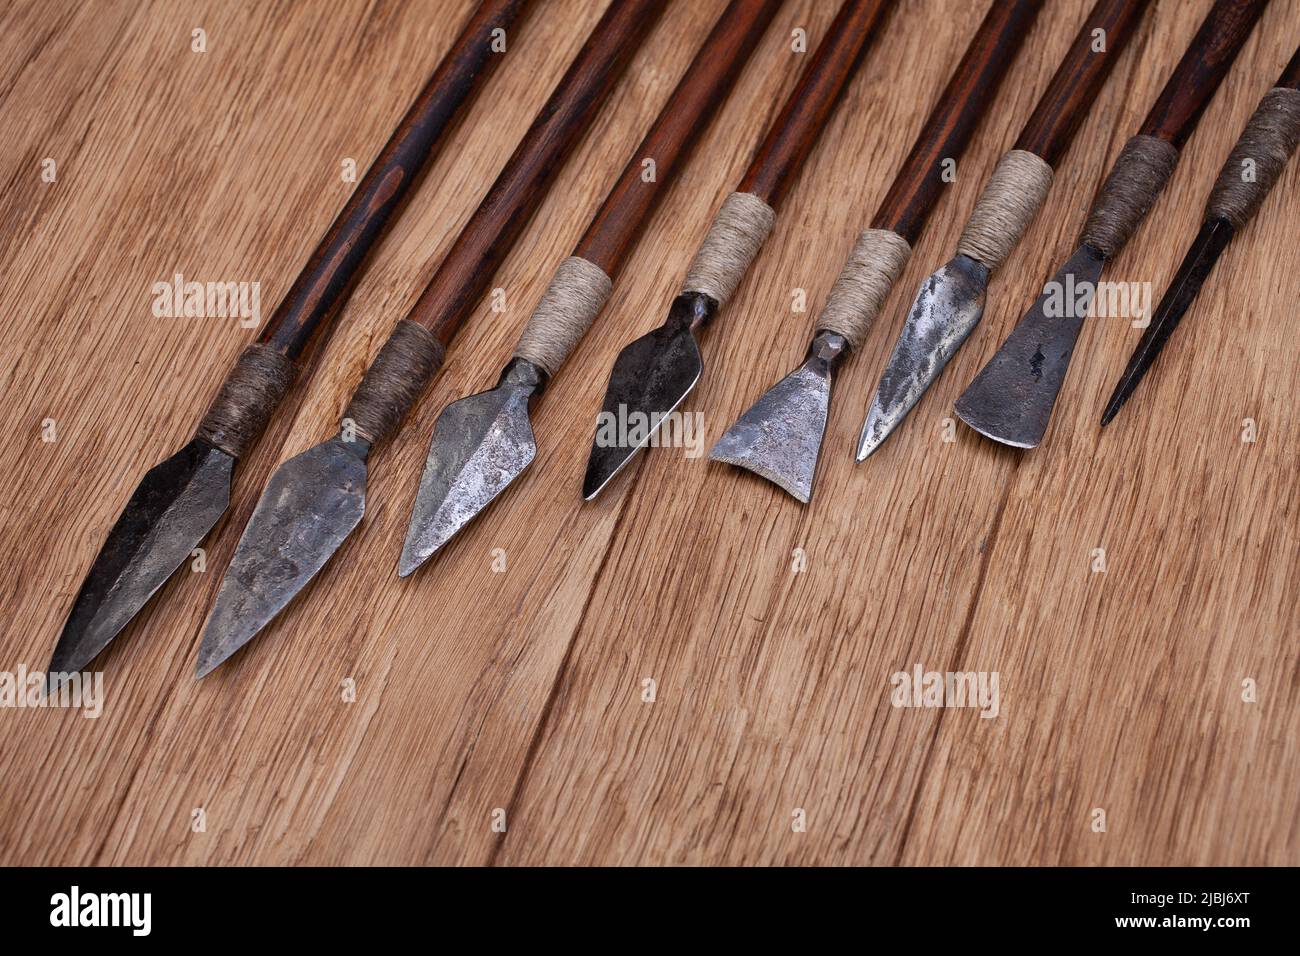 Different types of arrowheads made of iron on wooden background. Stock Photo